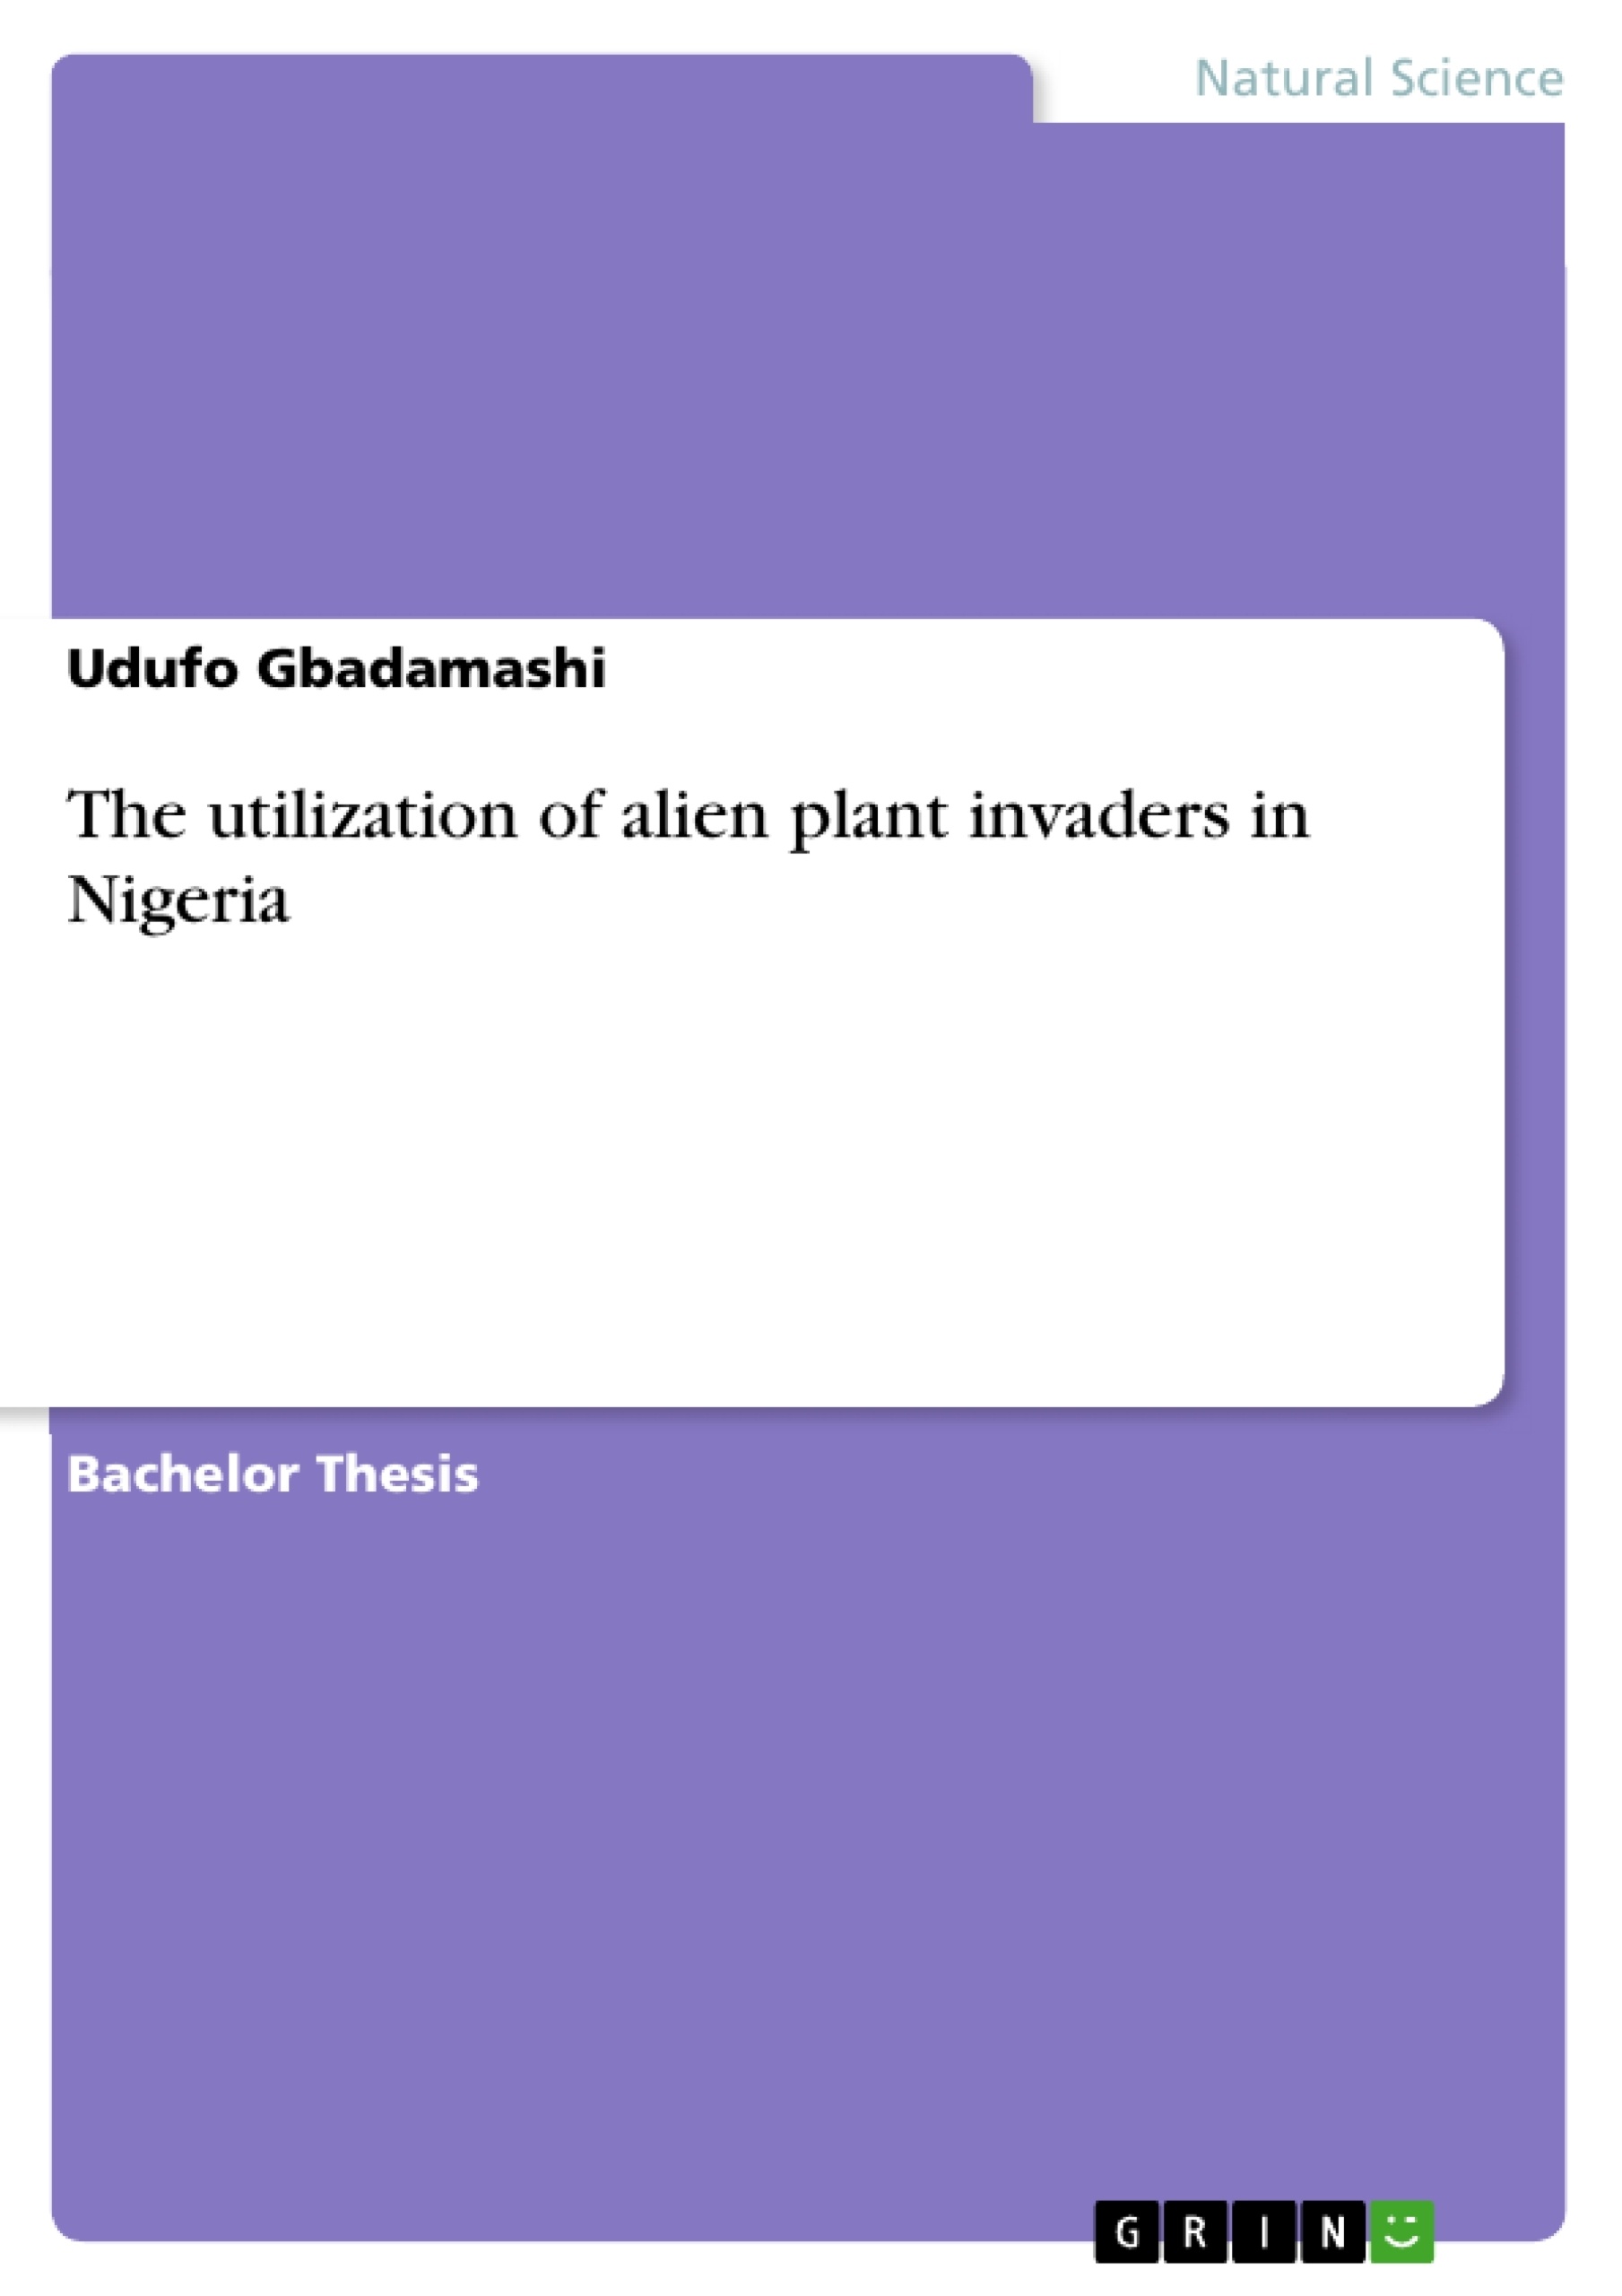 Title: The utilization of alien plant invaders in Nigeria